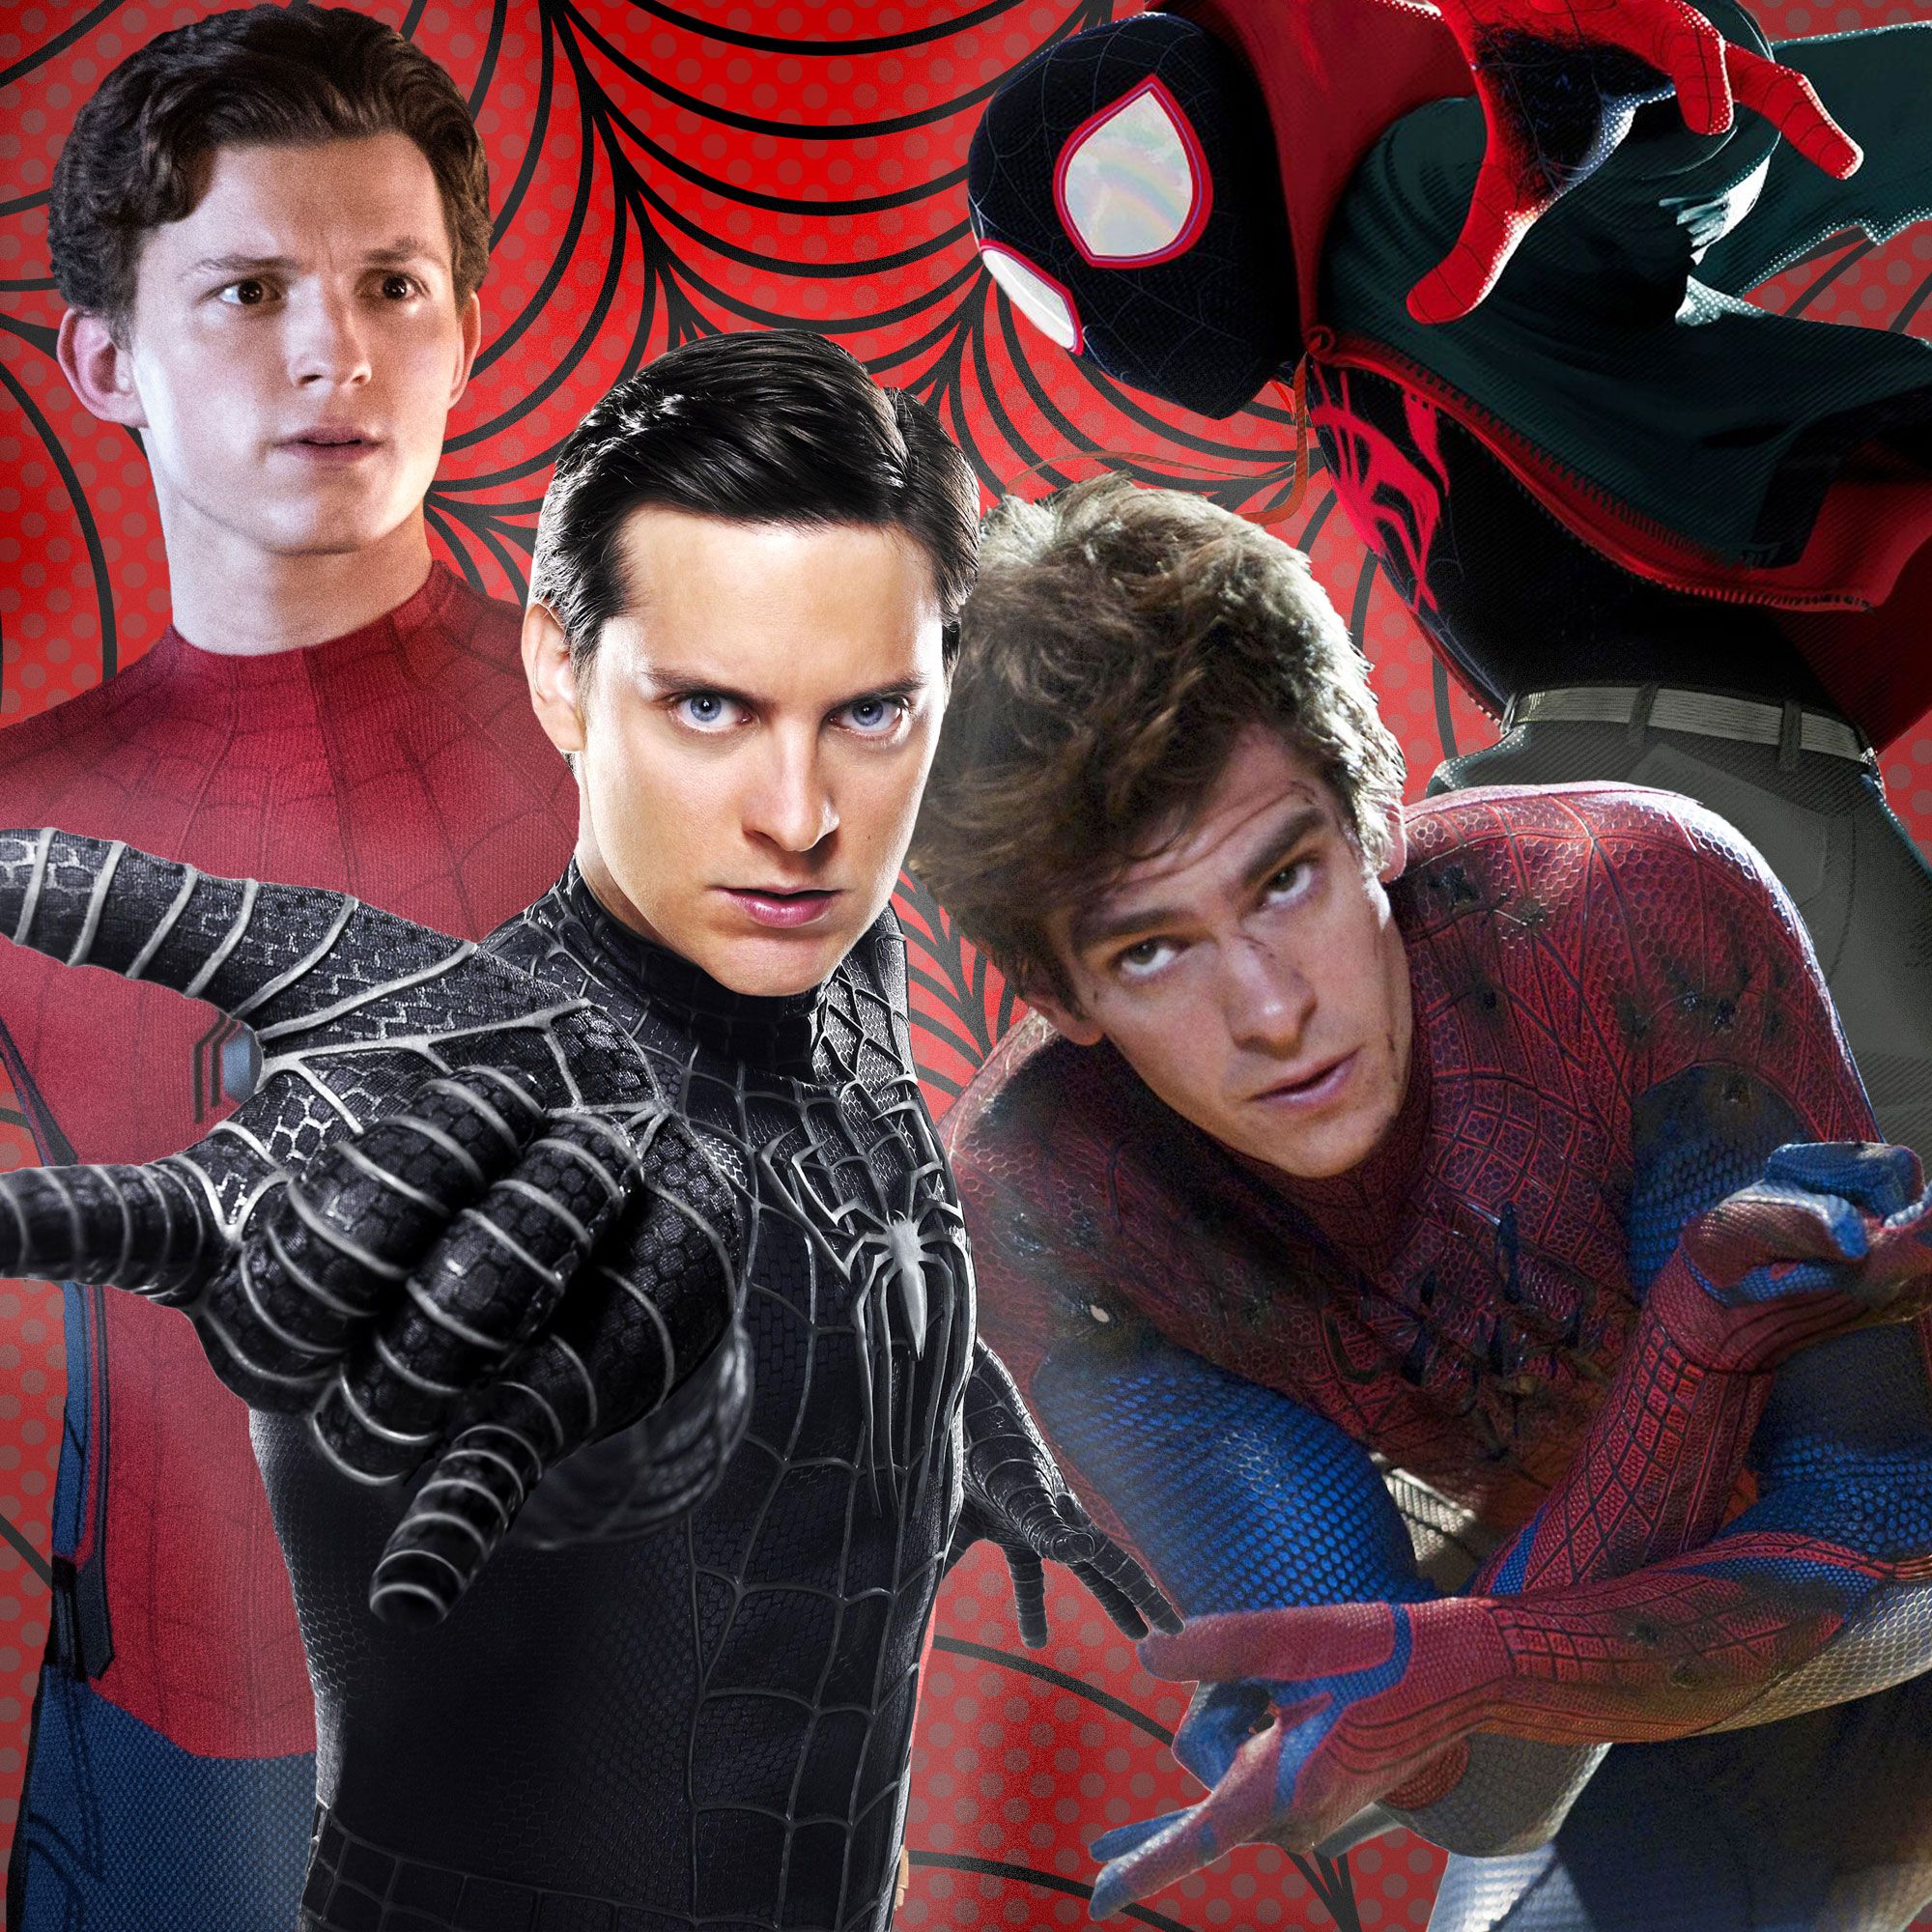 The Amazing Spider-Man 2 - Rotten Tomatoes